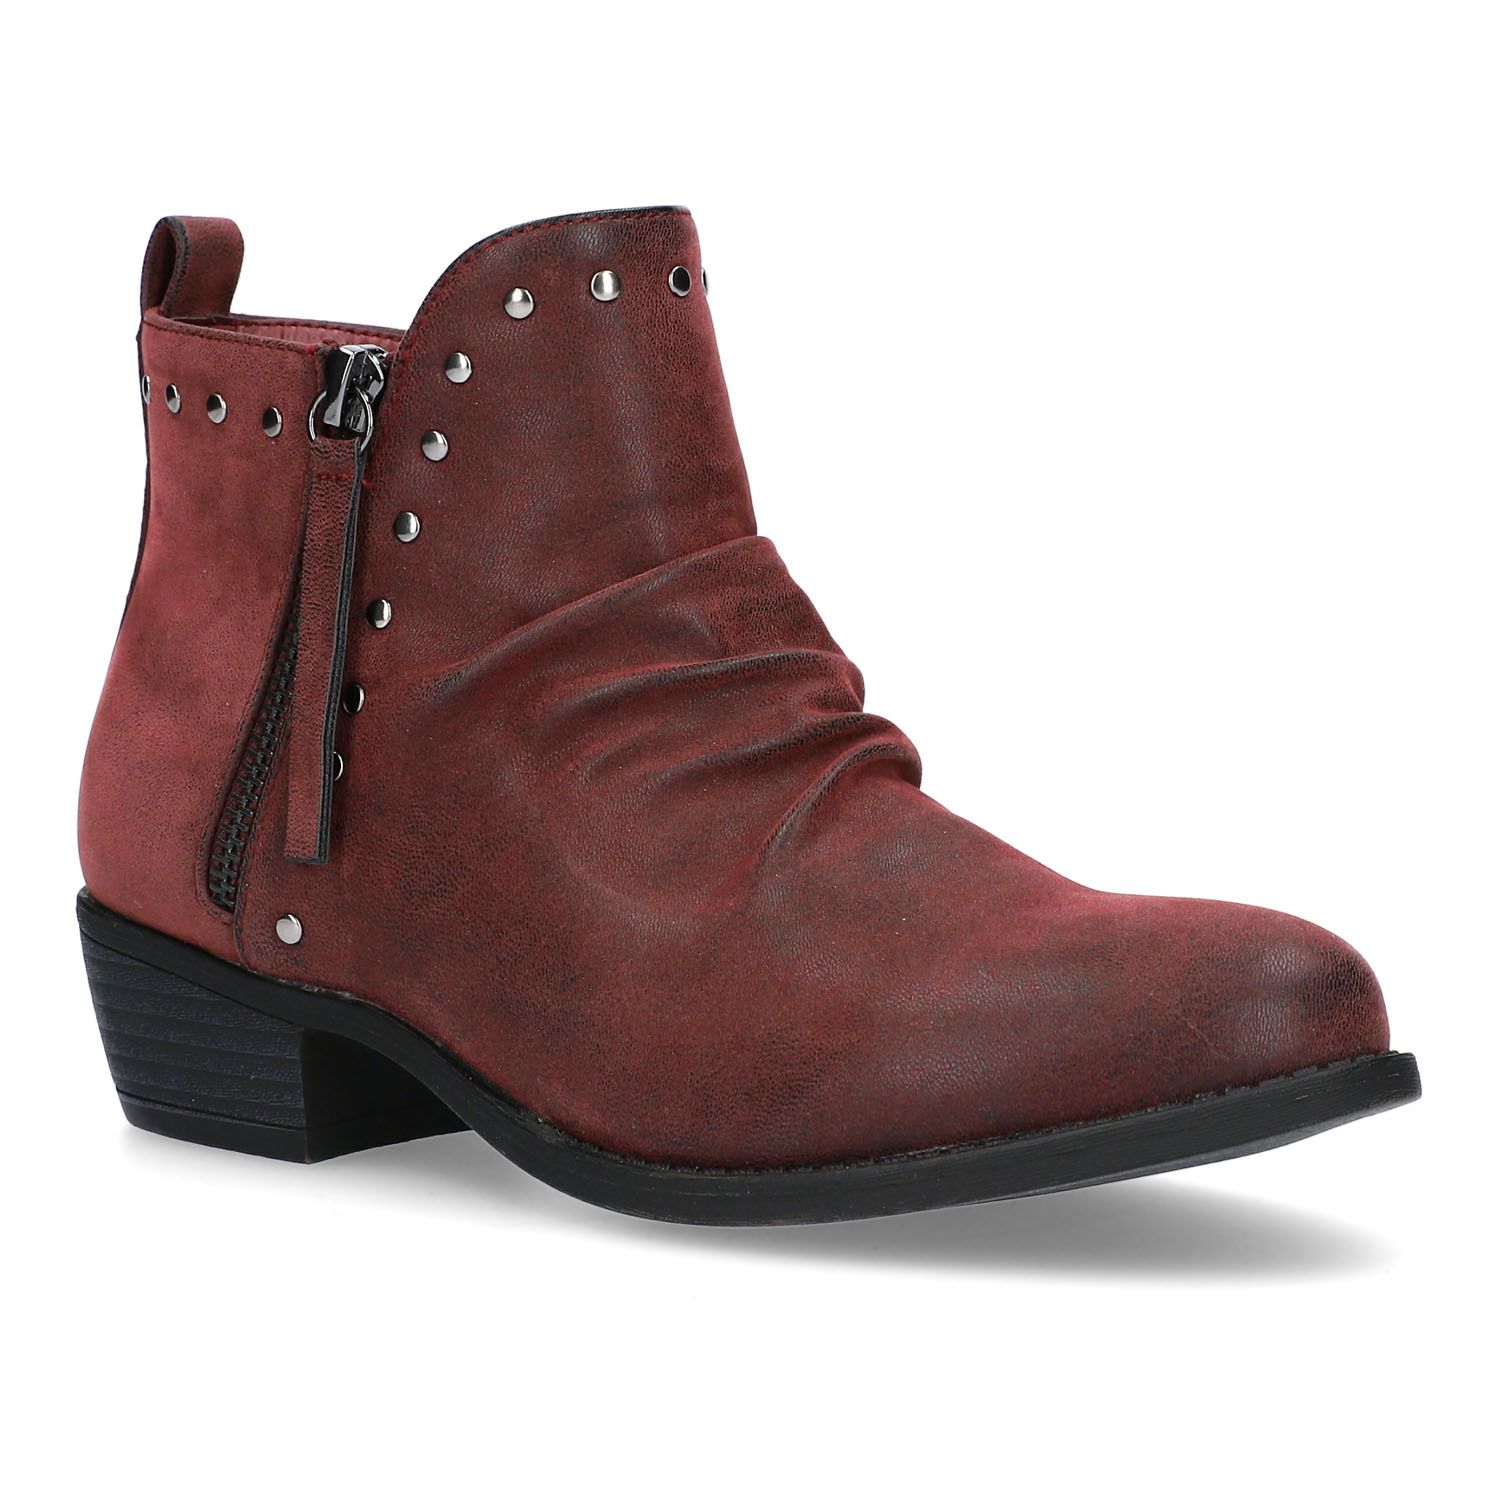 Image for Easy Street Elvie Women's Ankle Boots at Kohl's.